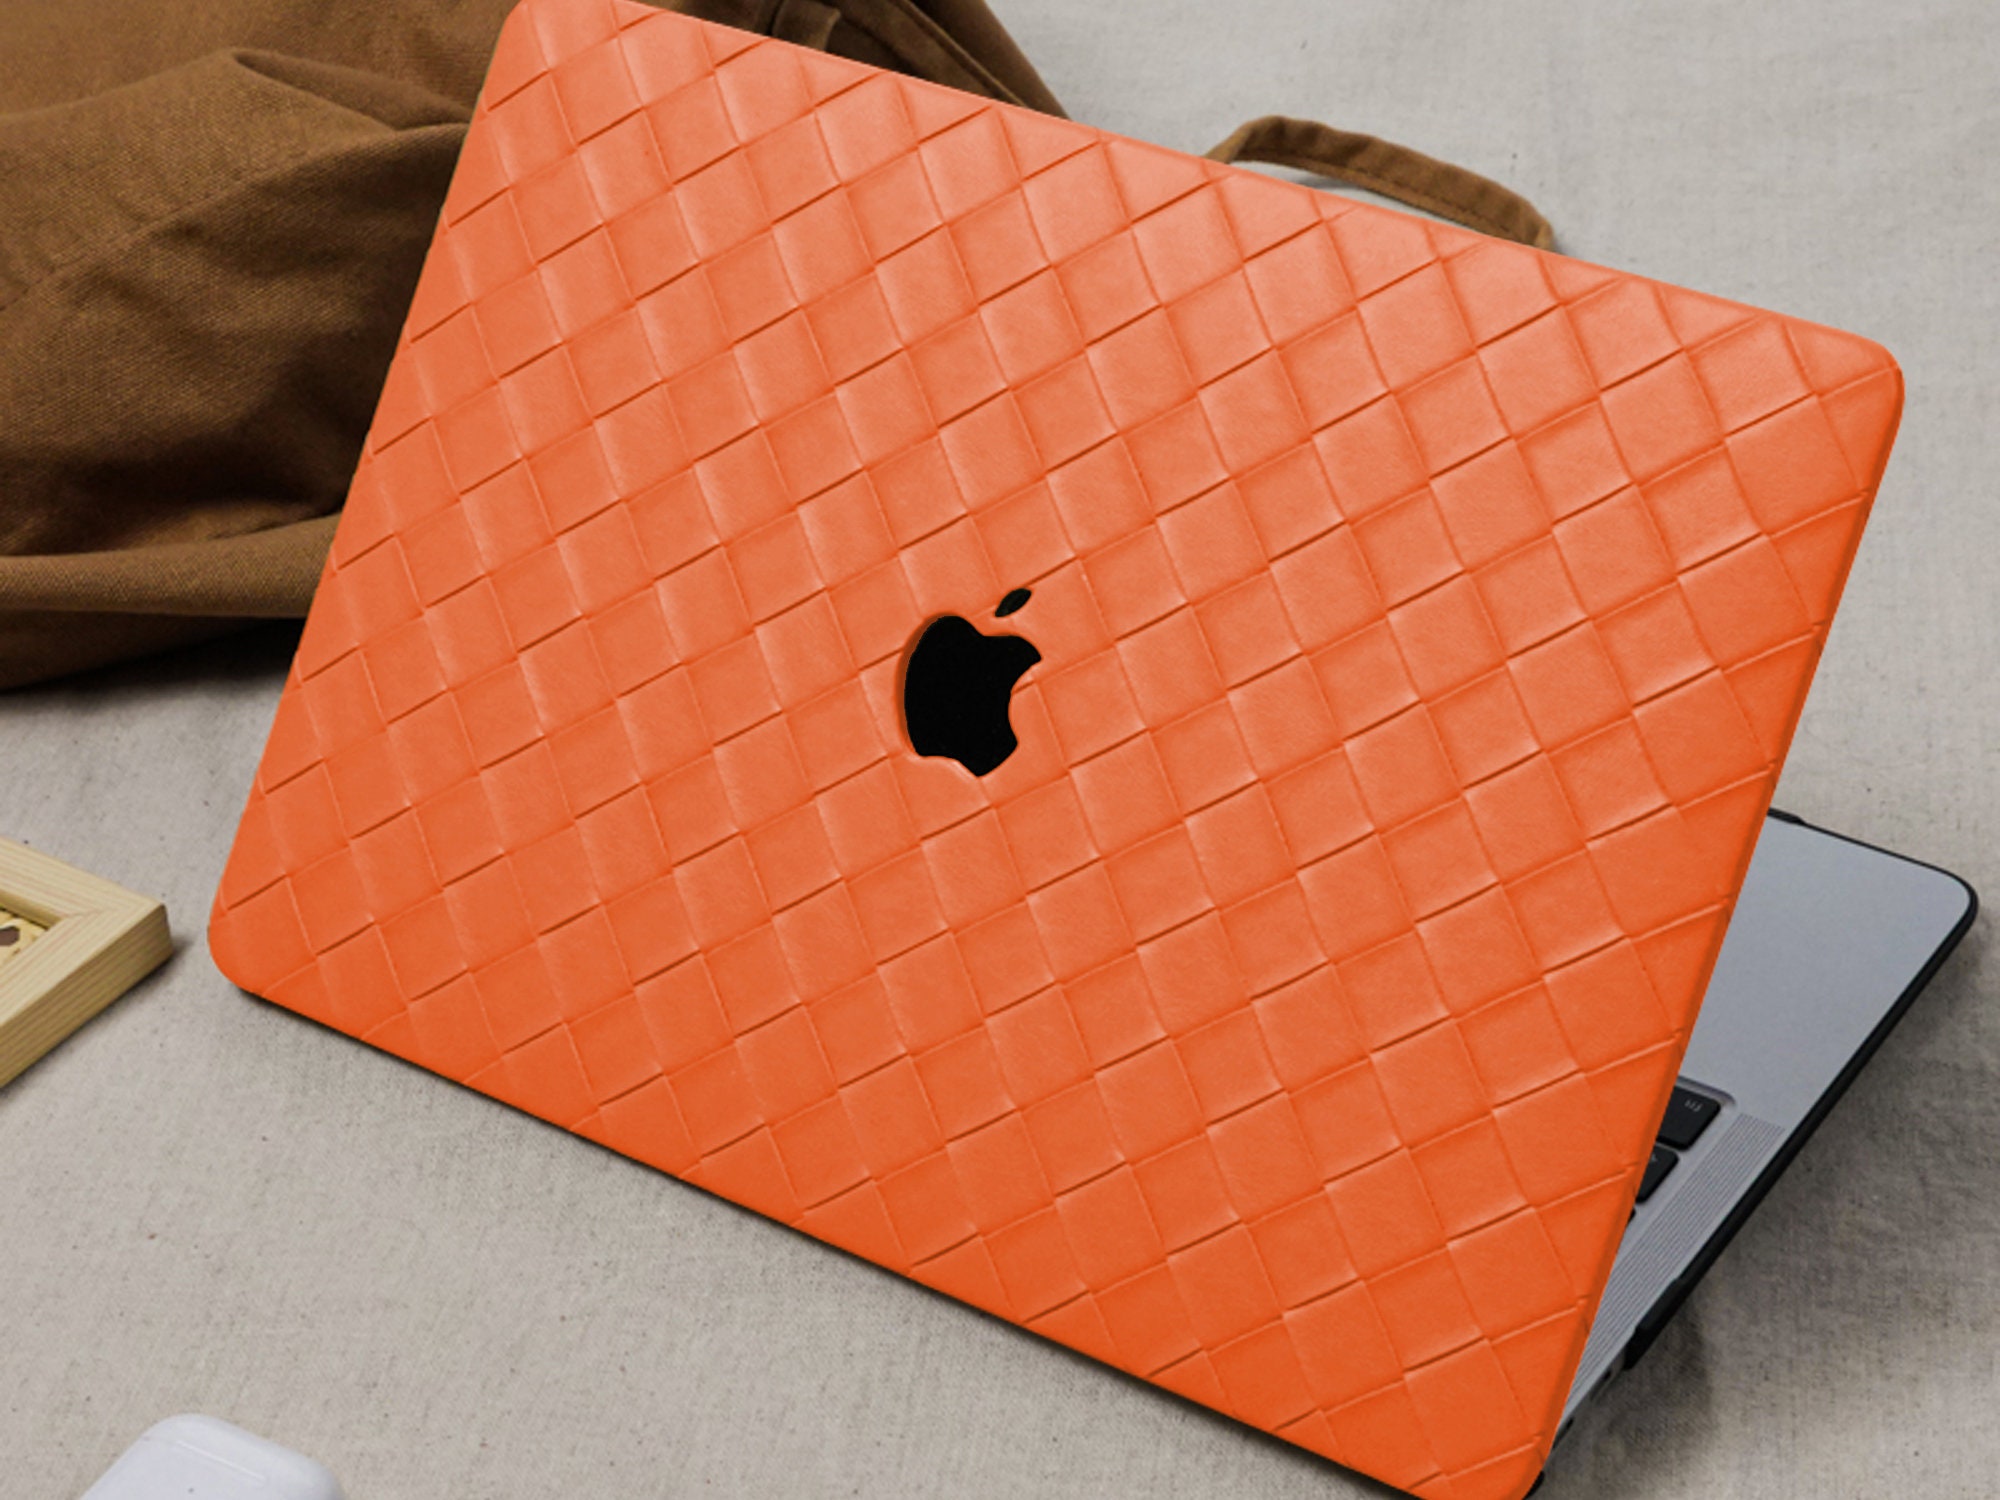 Lv Laptop Skins to Match Your Personal Style